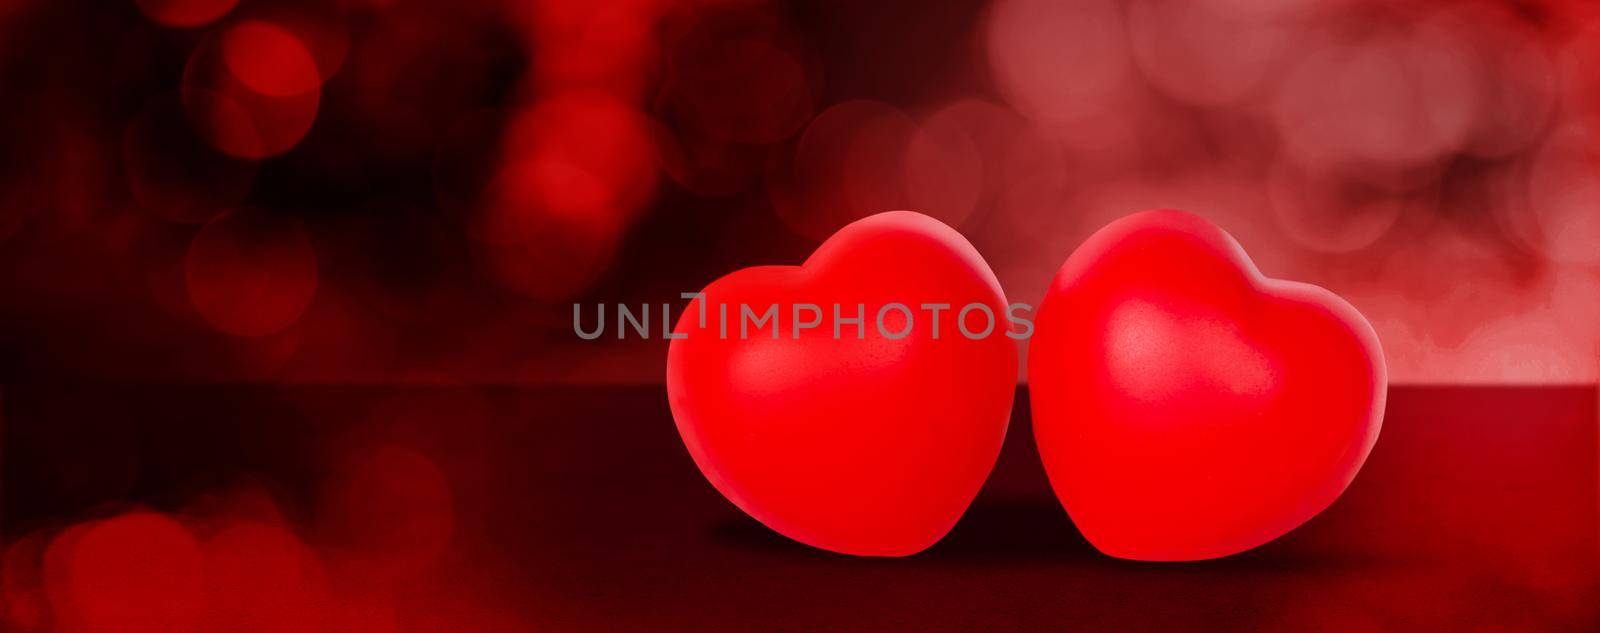 Two Heart shape on red bokeh background, abstract with glitter glowing, February 14 Valentine day, symbol of love and anniversary with romantic, couple sign with romance, nobody, holiday concept.